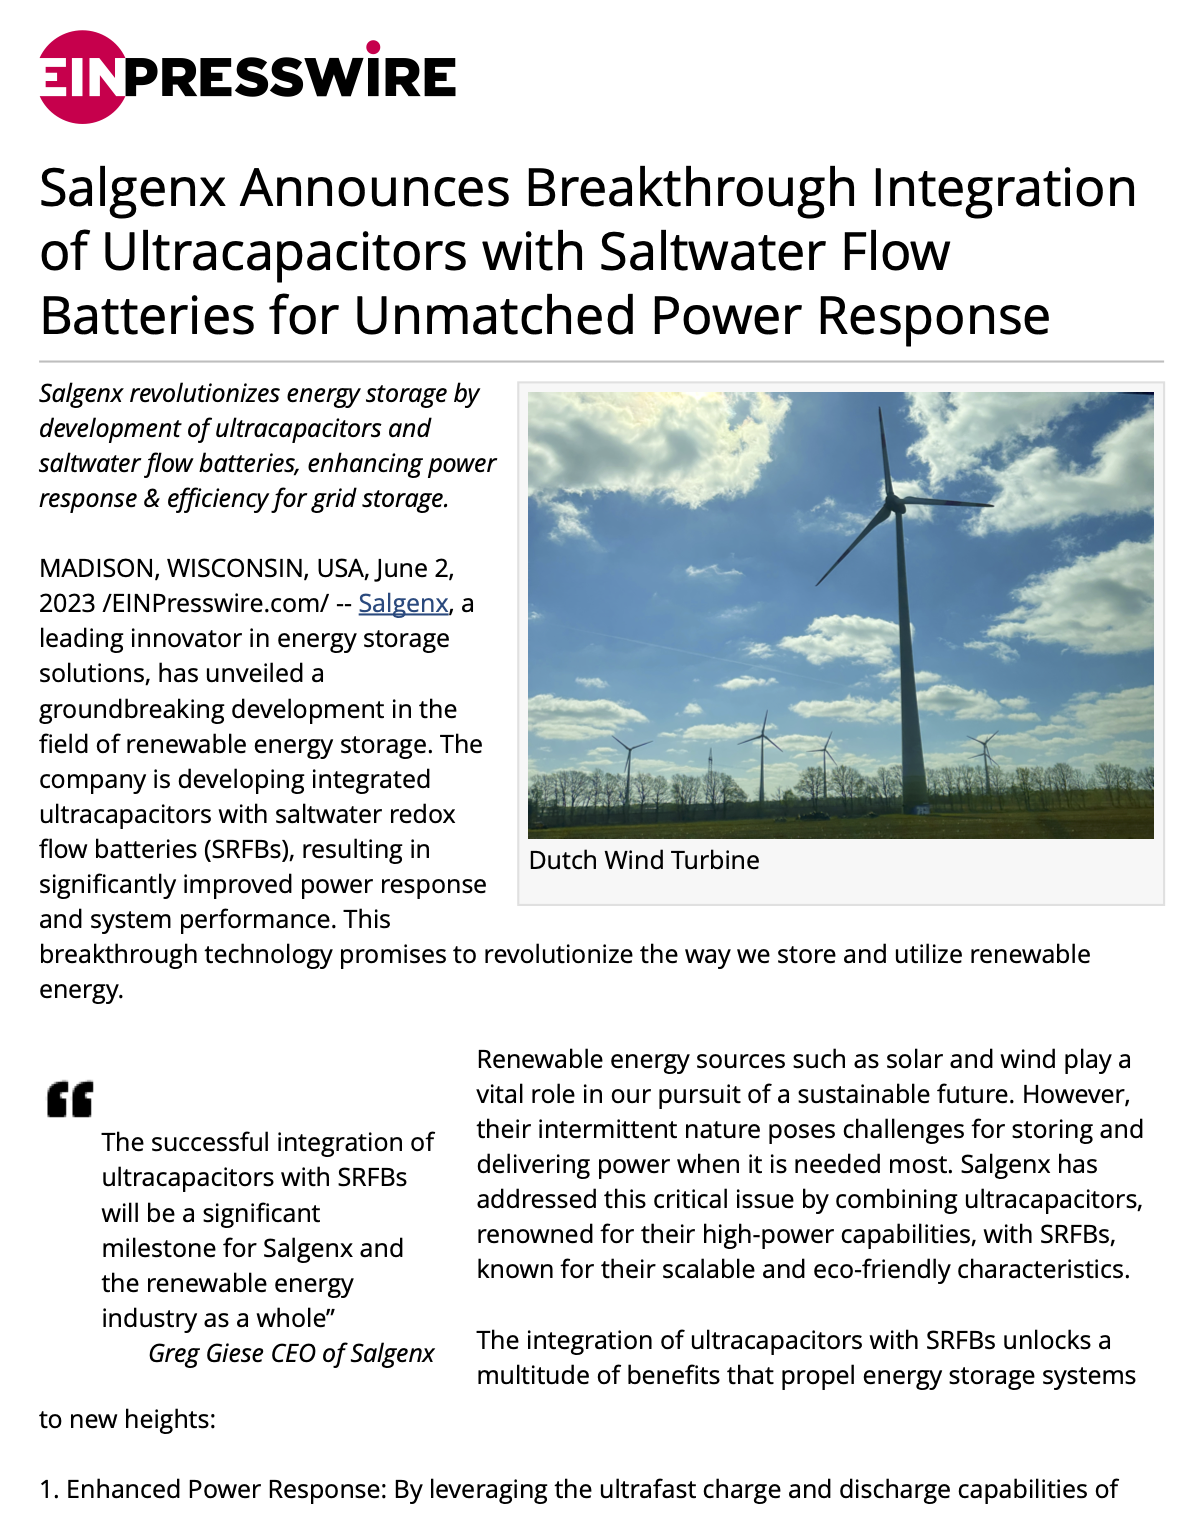 Salgenx Announces Breakthrough Integration of Ultracapacitors with Saltwater Flow Batteries for Unmatched Power Response